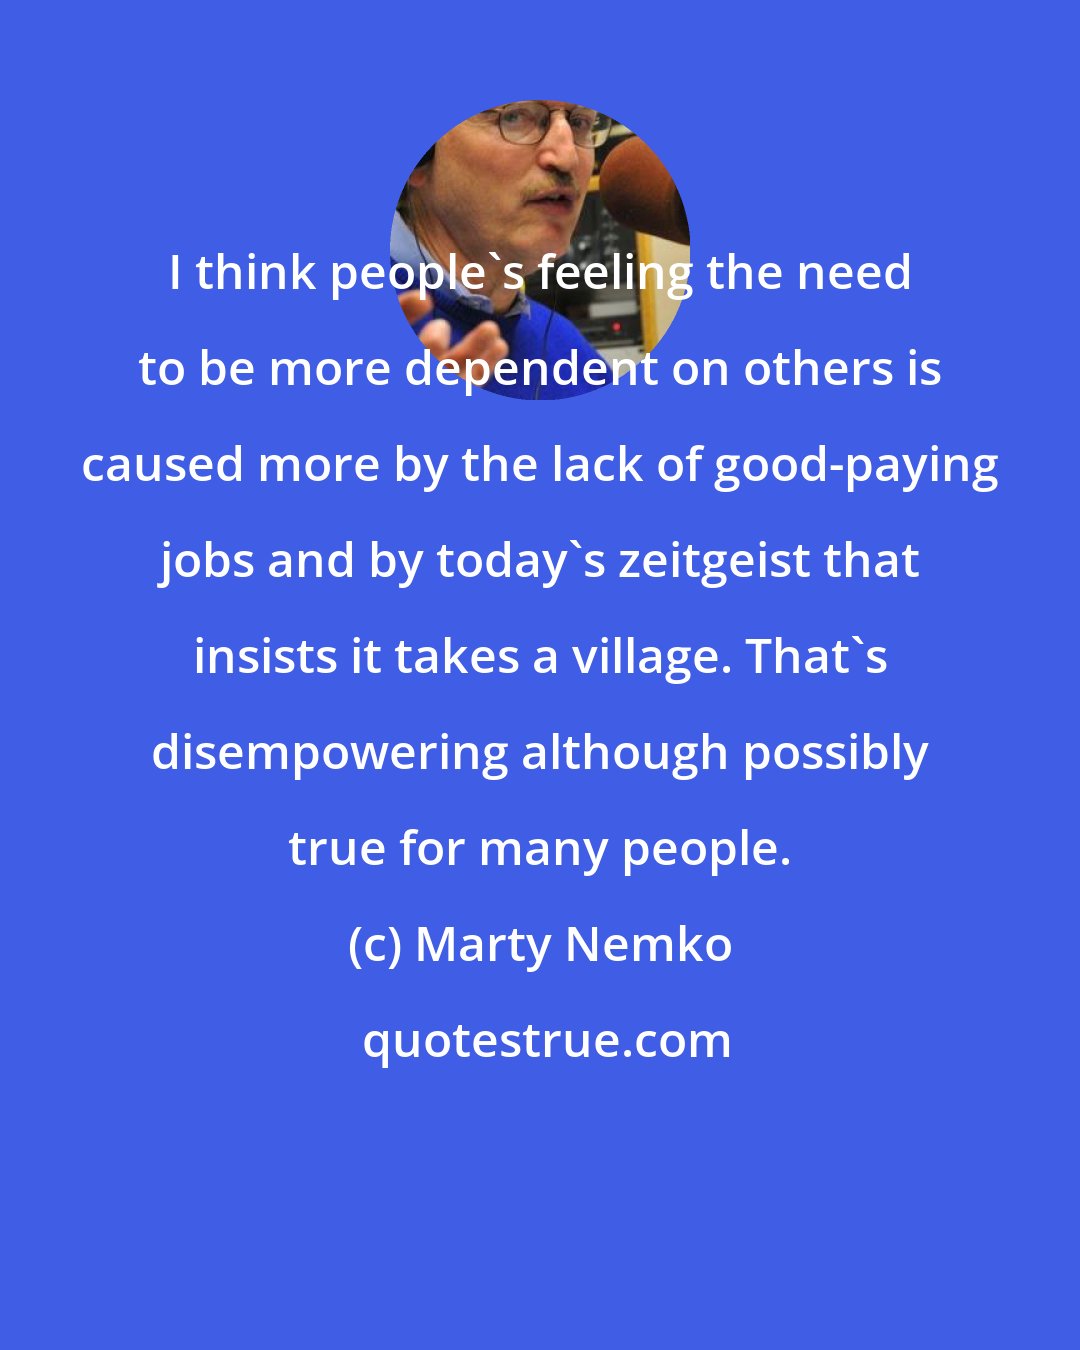 Marty Nemko: I think people's feeling the need to be more dependent on others is caused more by the lack of good-paying jobs and by today's zeitgeist that insists it takes a village. That's disempowering although possibly true for many people.